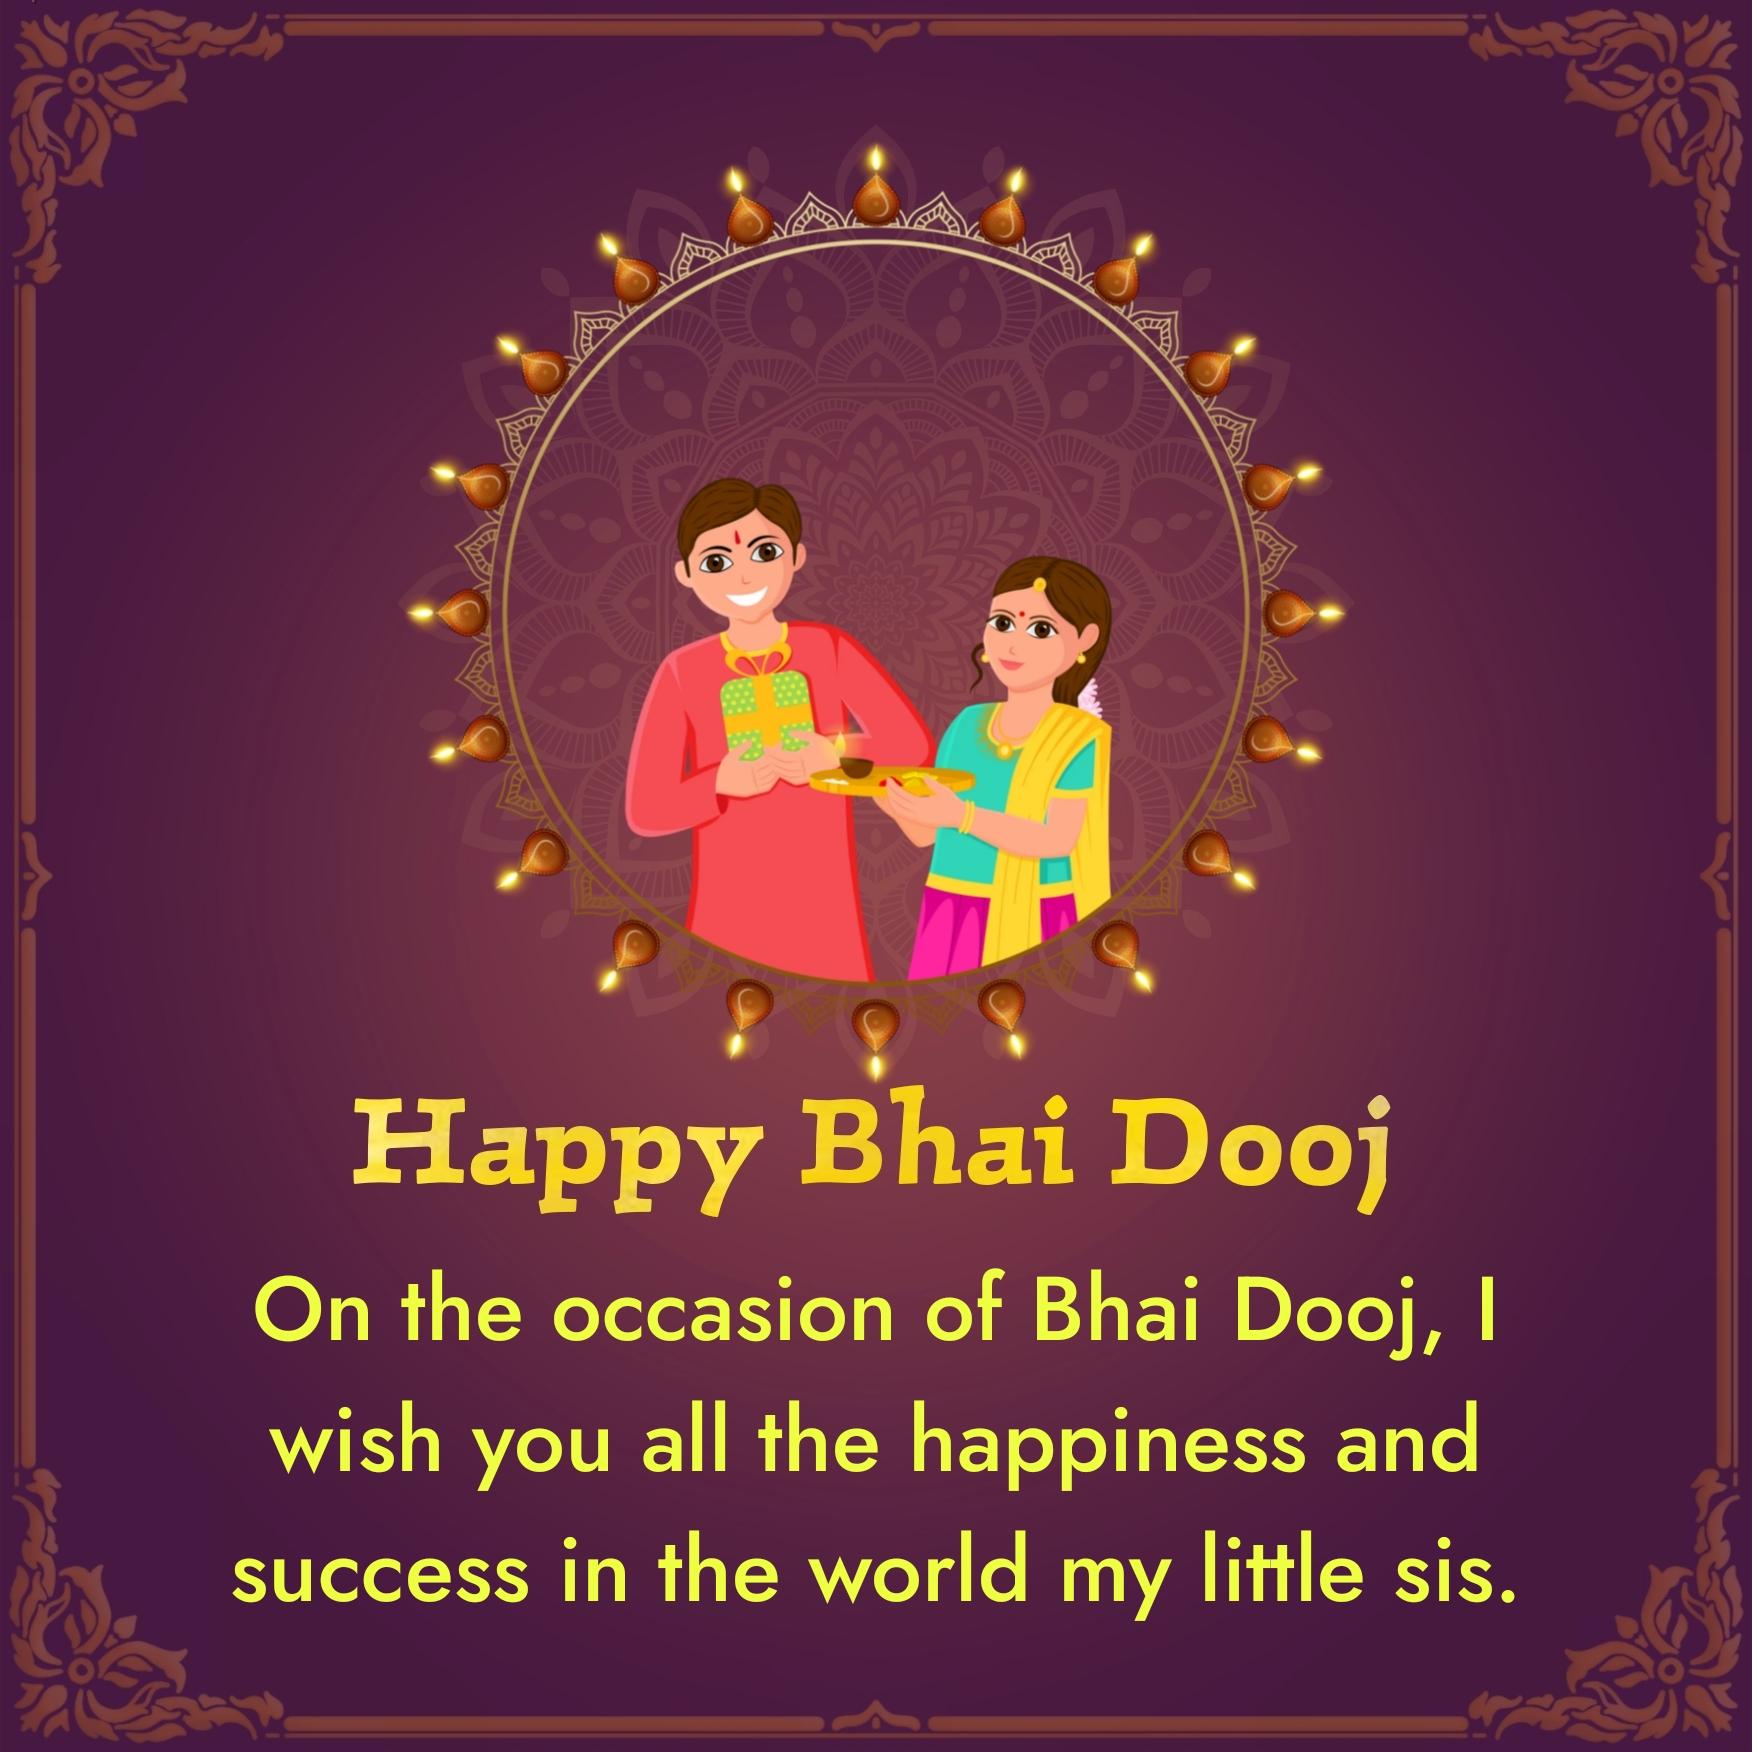 On the occasion of Bhai Dooj I wish you all the happiness